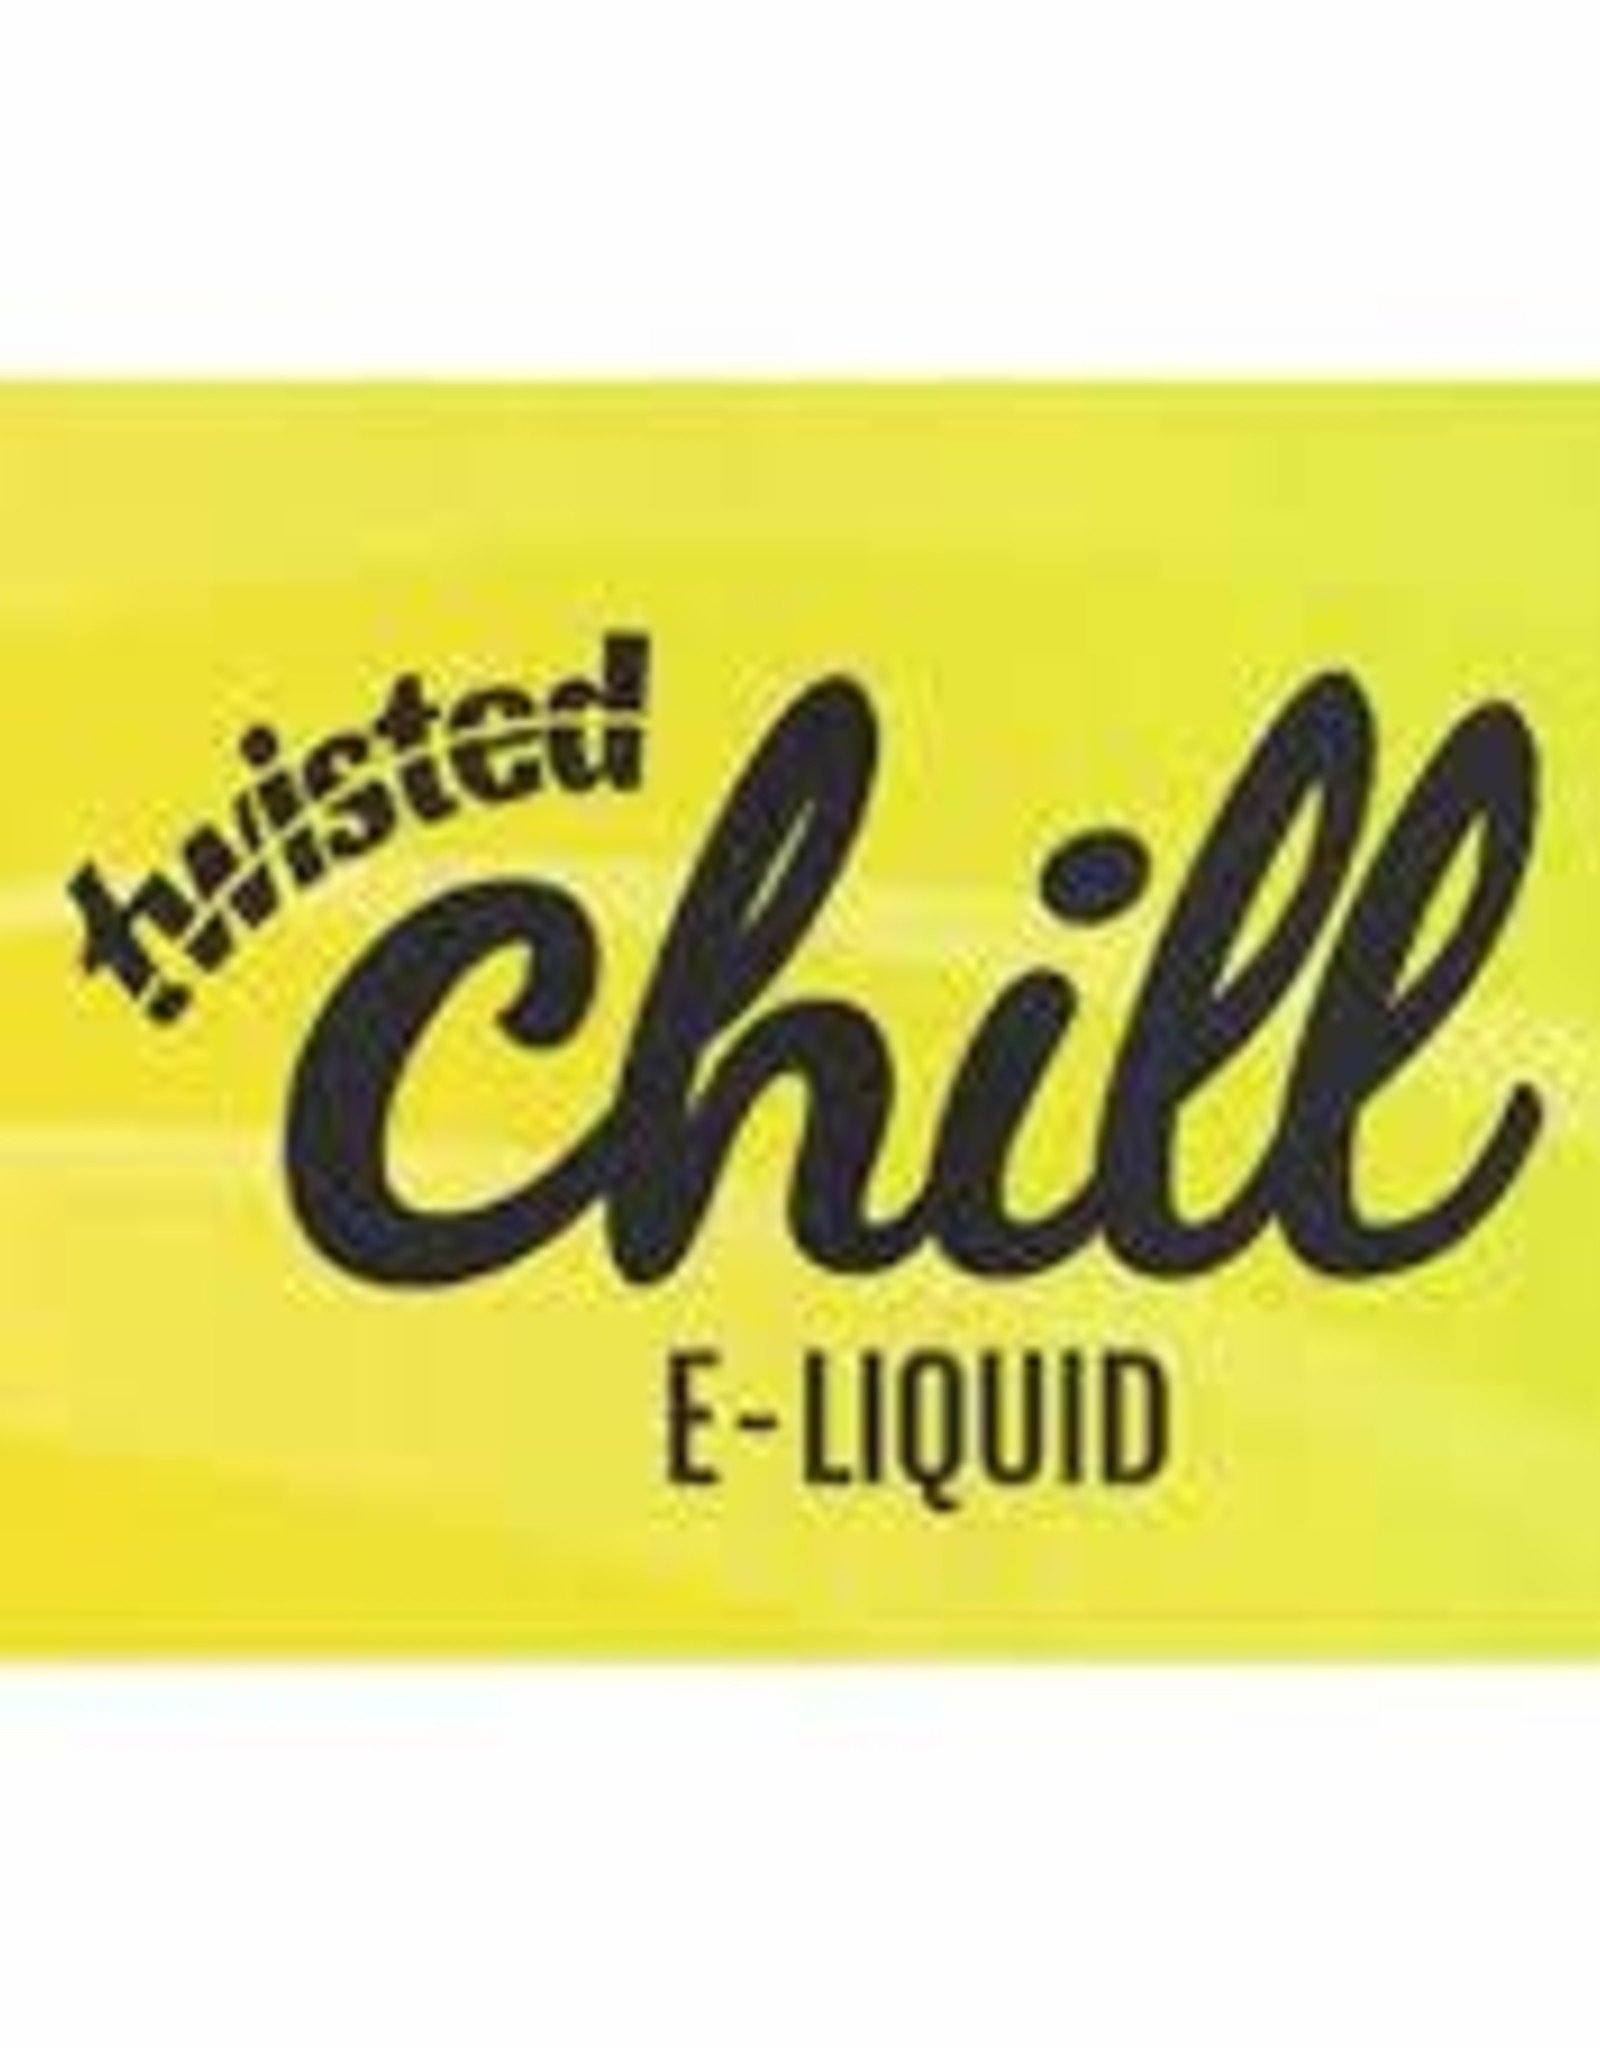 CHILL CHILL TWISTED